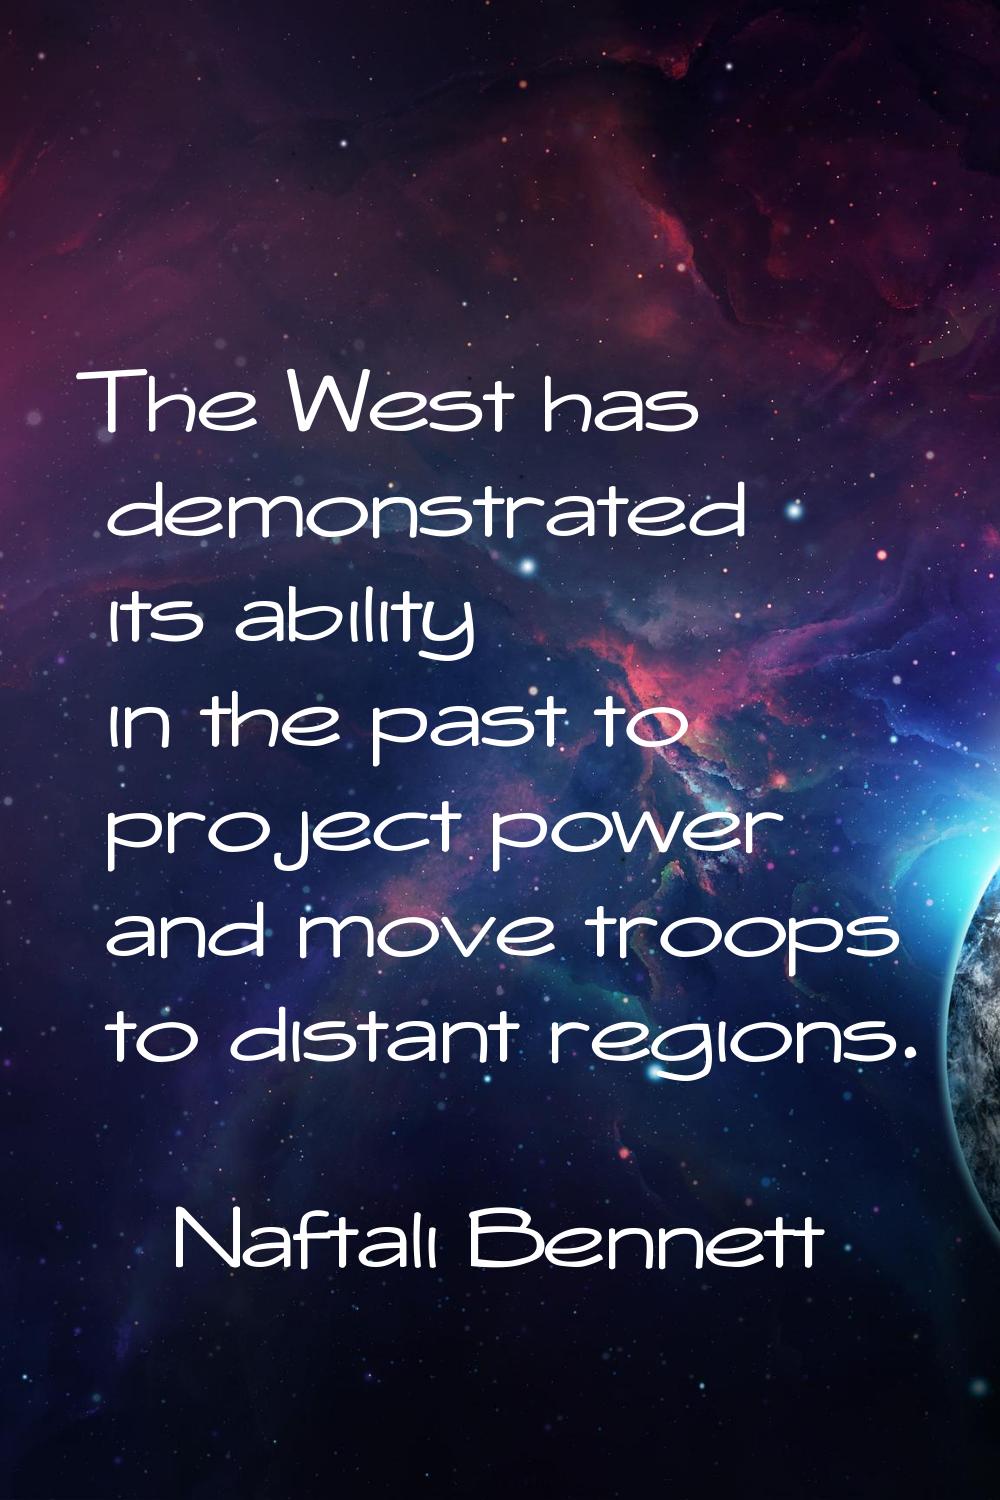 The West has demonstrated its ability in the past to project power and move troops to distant regio